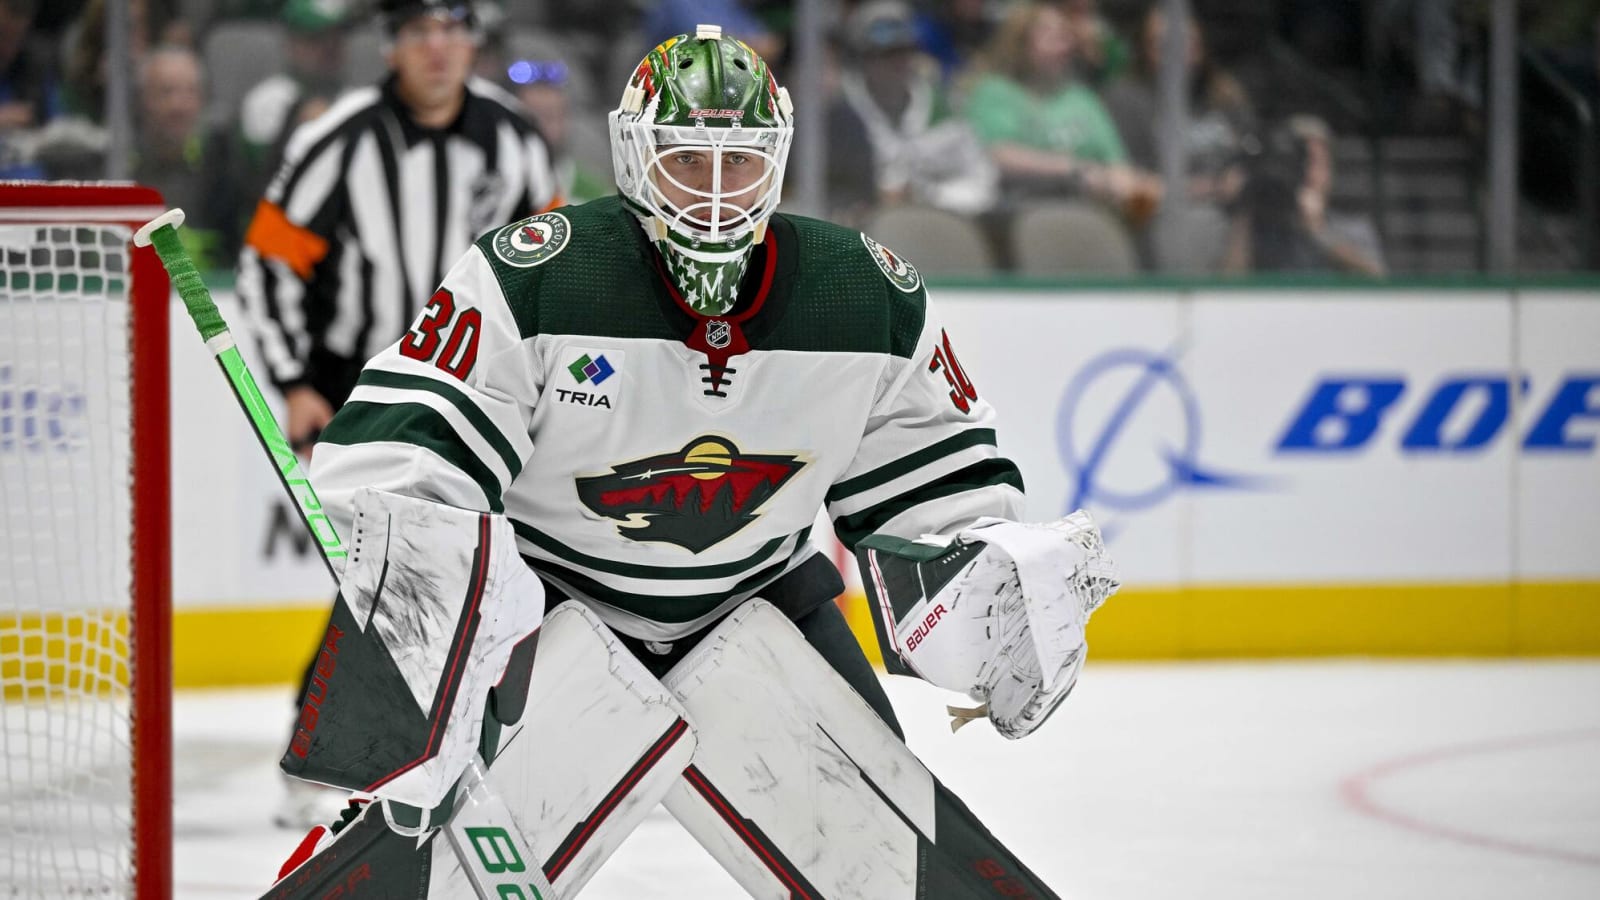 Wild’s Wallstedt Could be The Next Henrik Lundqvist But Better